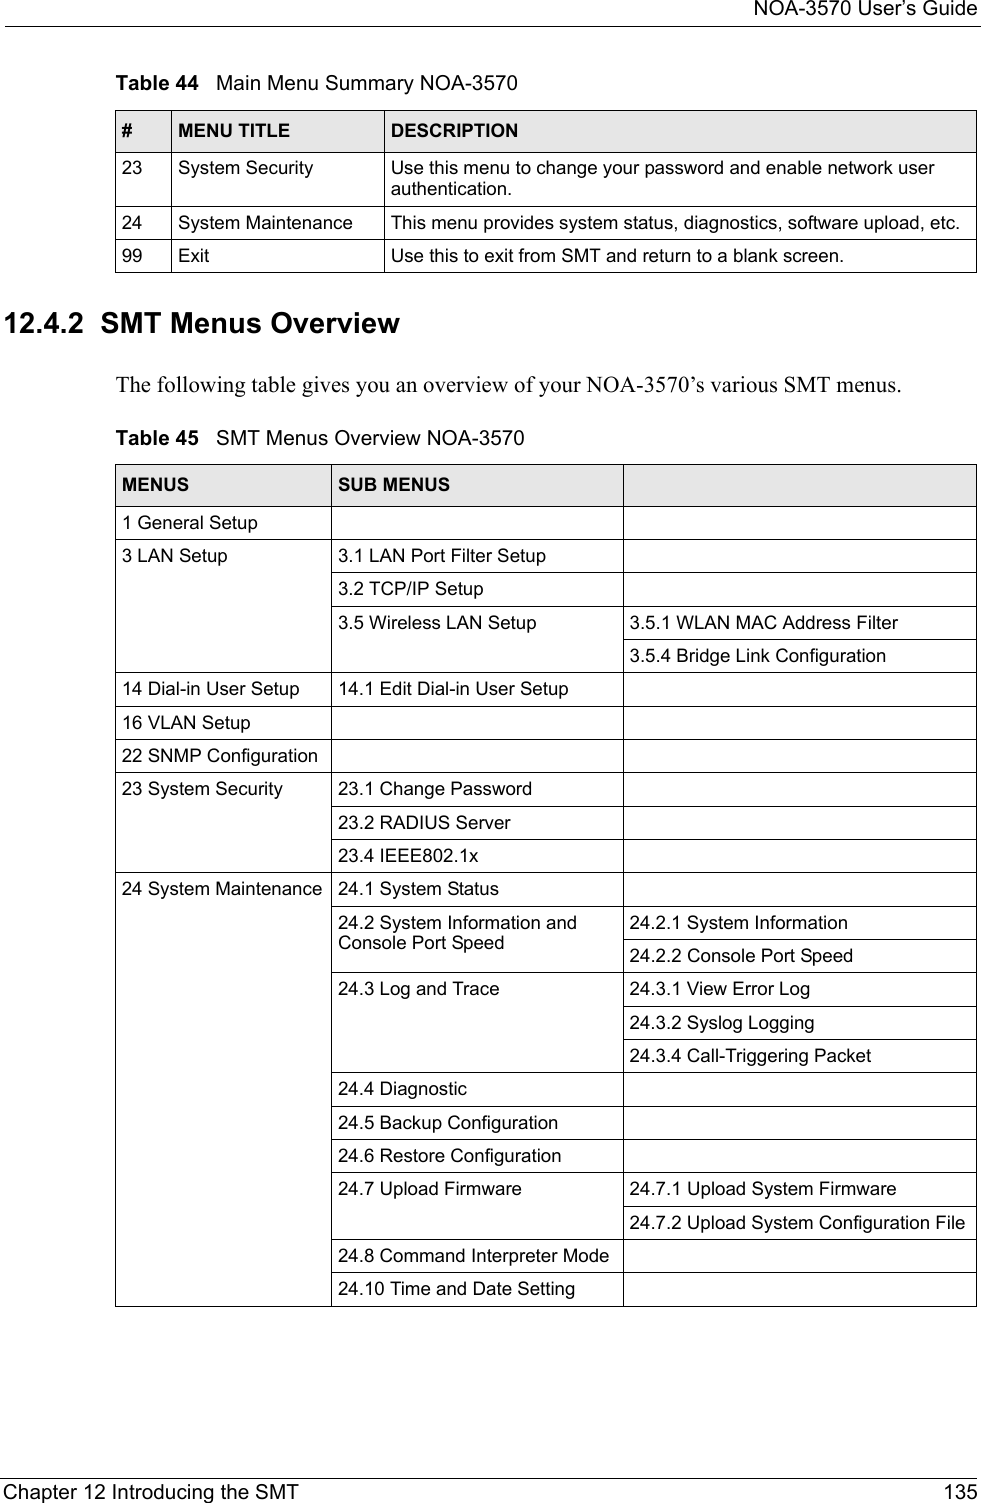 NOA-3570 User’s GuideChapter 12 Introducing the SMT 13512.4.2  SMT Menus OverviewThe following table gives you an overview of your NOA-3570’s various SMT menus.23 System Security Use this menu to change your password and enable network user authentication.24 System Maintenance This menu provides system status, diagnostics, software upload, etc.99 Exit Use this to exit from SMT and return to a blank screen.Table 44   Main Menu Summary NOA-3570#MENU TITLE DESCRIPTIONTable 45   SMT Menus Overview NOA-3570MENUS SUB MENUS1 General Setup3 LAN Setup 3.1 LAN Port Filter Setup3.2 TCP/IP Setup3.5 Wireless LAN Setup 3.5.1 WLAN MAC Address Filter3.5.4 Bridge Link Configuration14 Dial-in User Setup 14.1 Edit Dial-in User Setup16 VLAN Setup22 SNMP Configuration23 System Security 23.1 Change Password23.2 RADIUS Server23.4 IEEE802.1x24 System Maintenance 24.1 System Status24.2 System Information and Console Port Speed24.2.1 System Information24.2.2 Console Port Speed24.3 Log and Trace 24.3.1 View Error Log24.3.2 Syslog Logging24.3.4 Call-Triggering Packet24.4 Diagnostic24.5 Backup Configuration24.6 Restore Configuration24.7 Upload Firmware 24.7.1 Upload System Firmware24.7.2 Upload System Configuration File24.8 Command Interpreter Mode24.10 Time and Date Setting